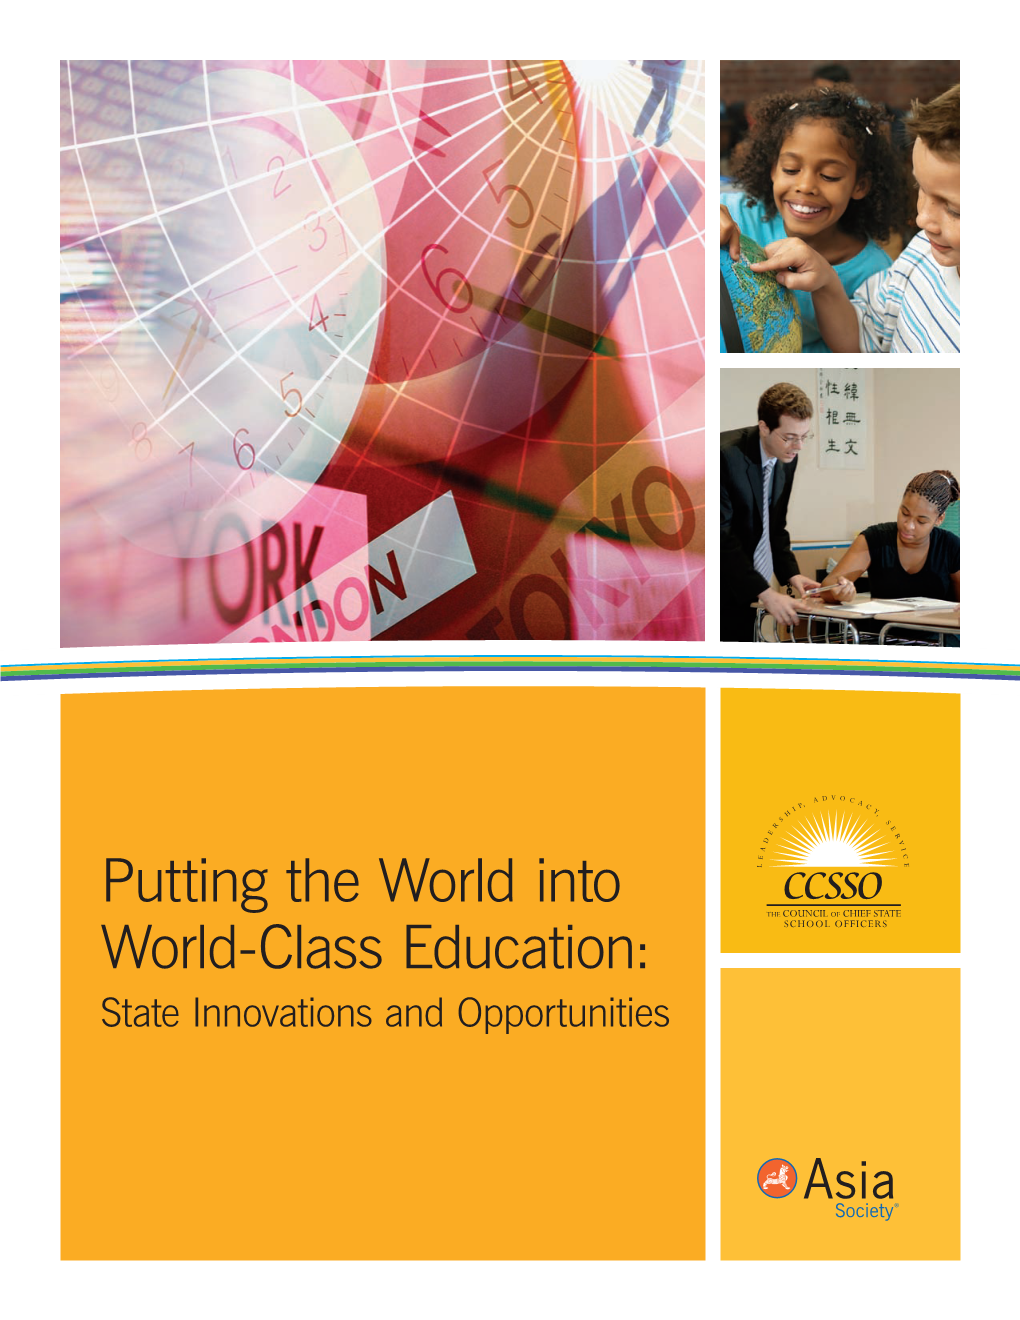 Putting the World Into World-Class Education: State Innovations and Opportunities